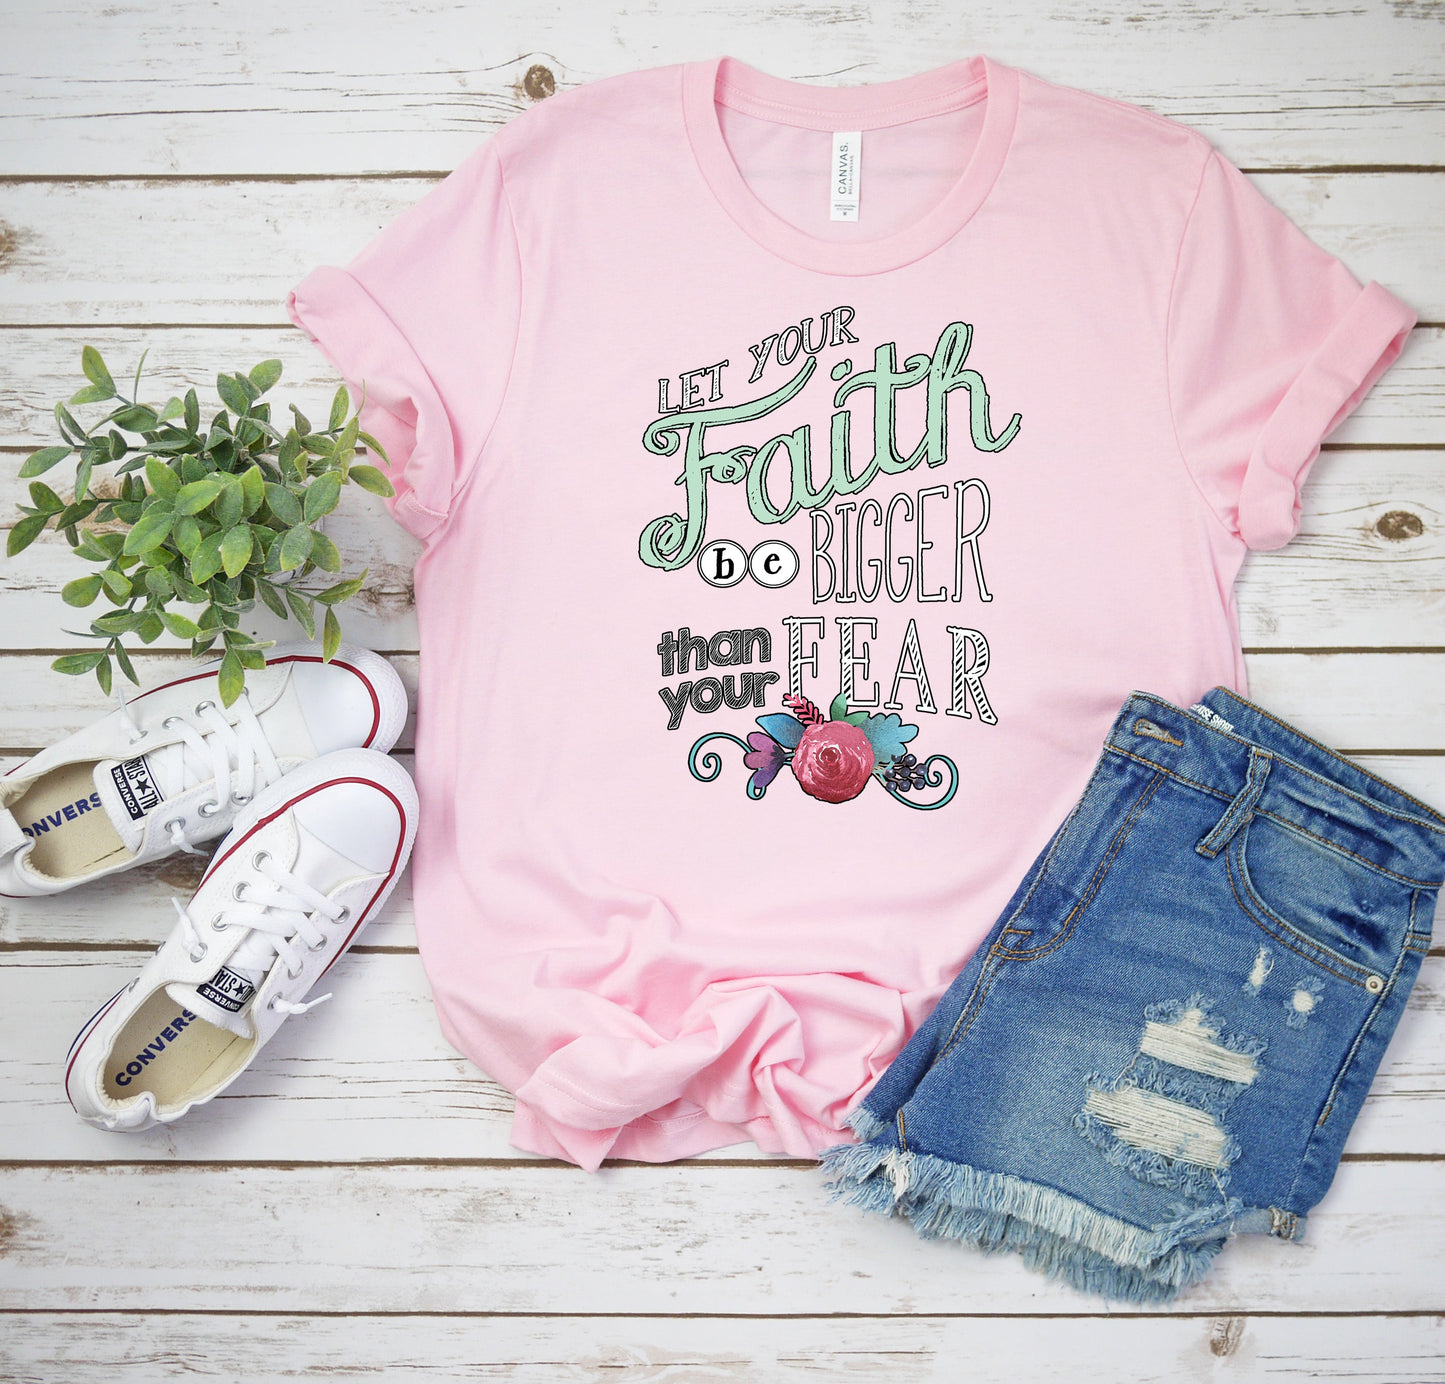 Inspirational T-Shirt, Let Your Faith Be Bigger Than Your Fear Tee